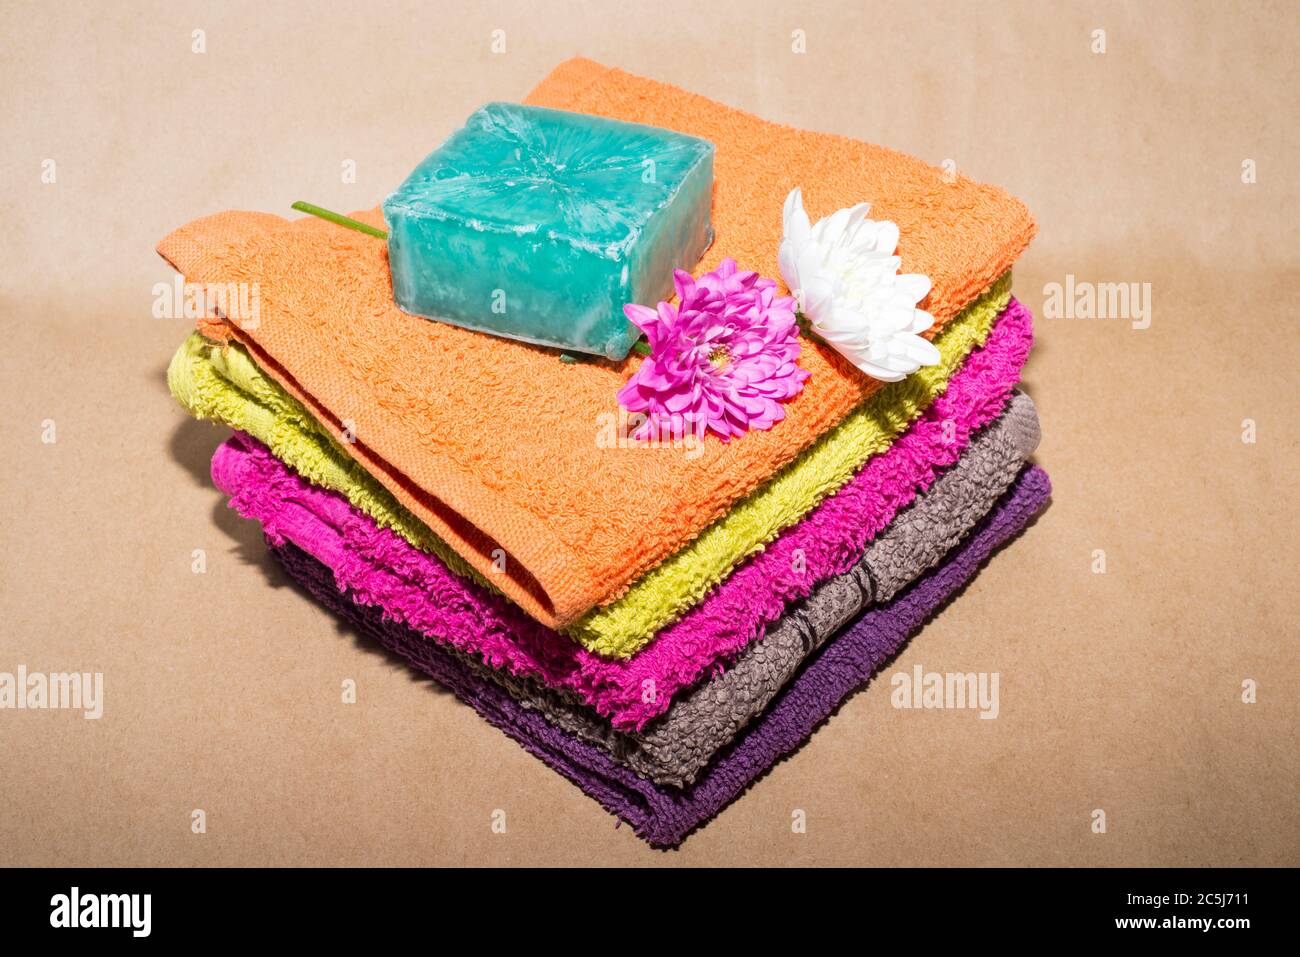 soap bar on top of facecloths off various shades with flowers Stock Photo